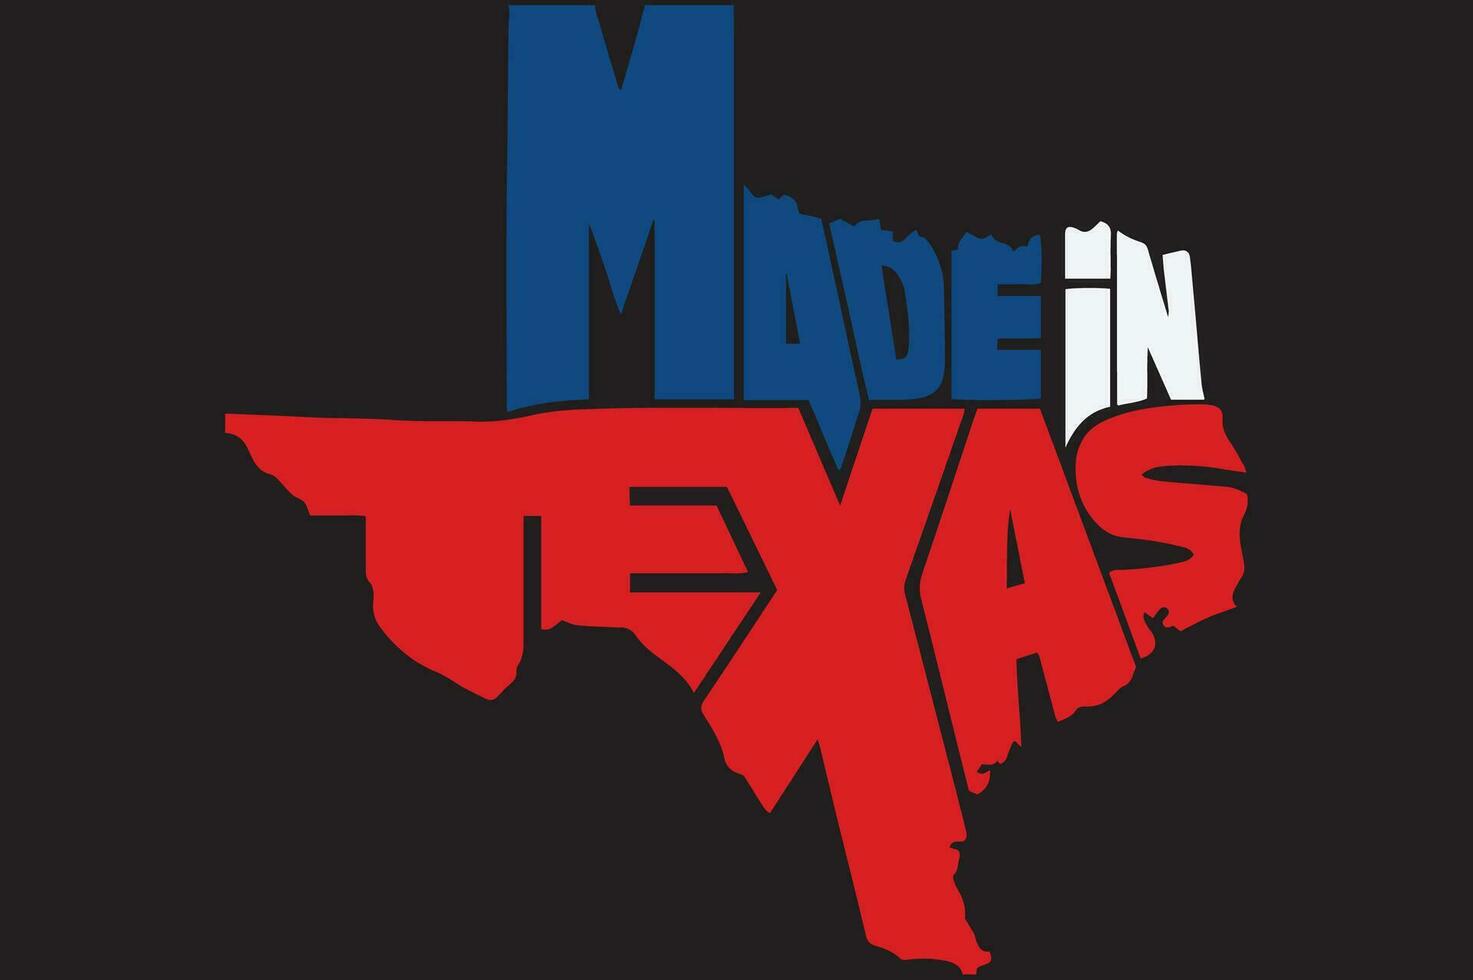 Made in Texas design in the shape of Texas map vector